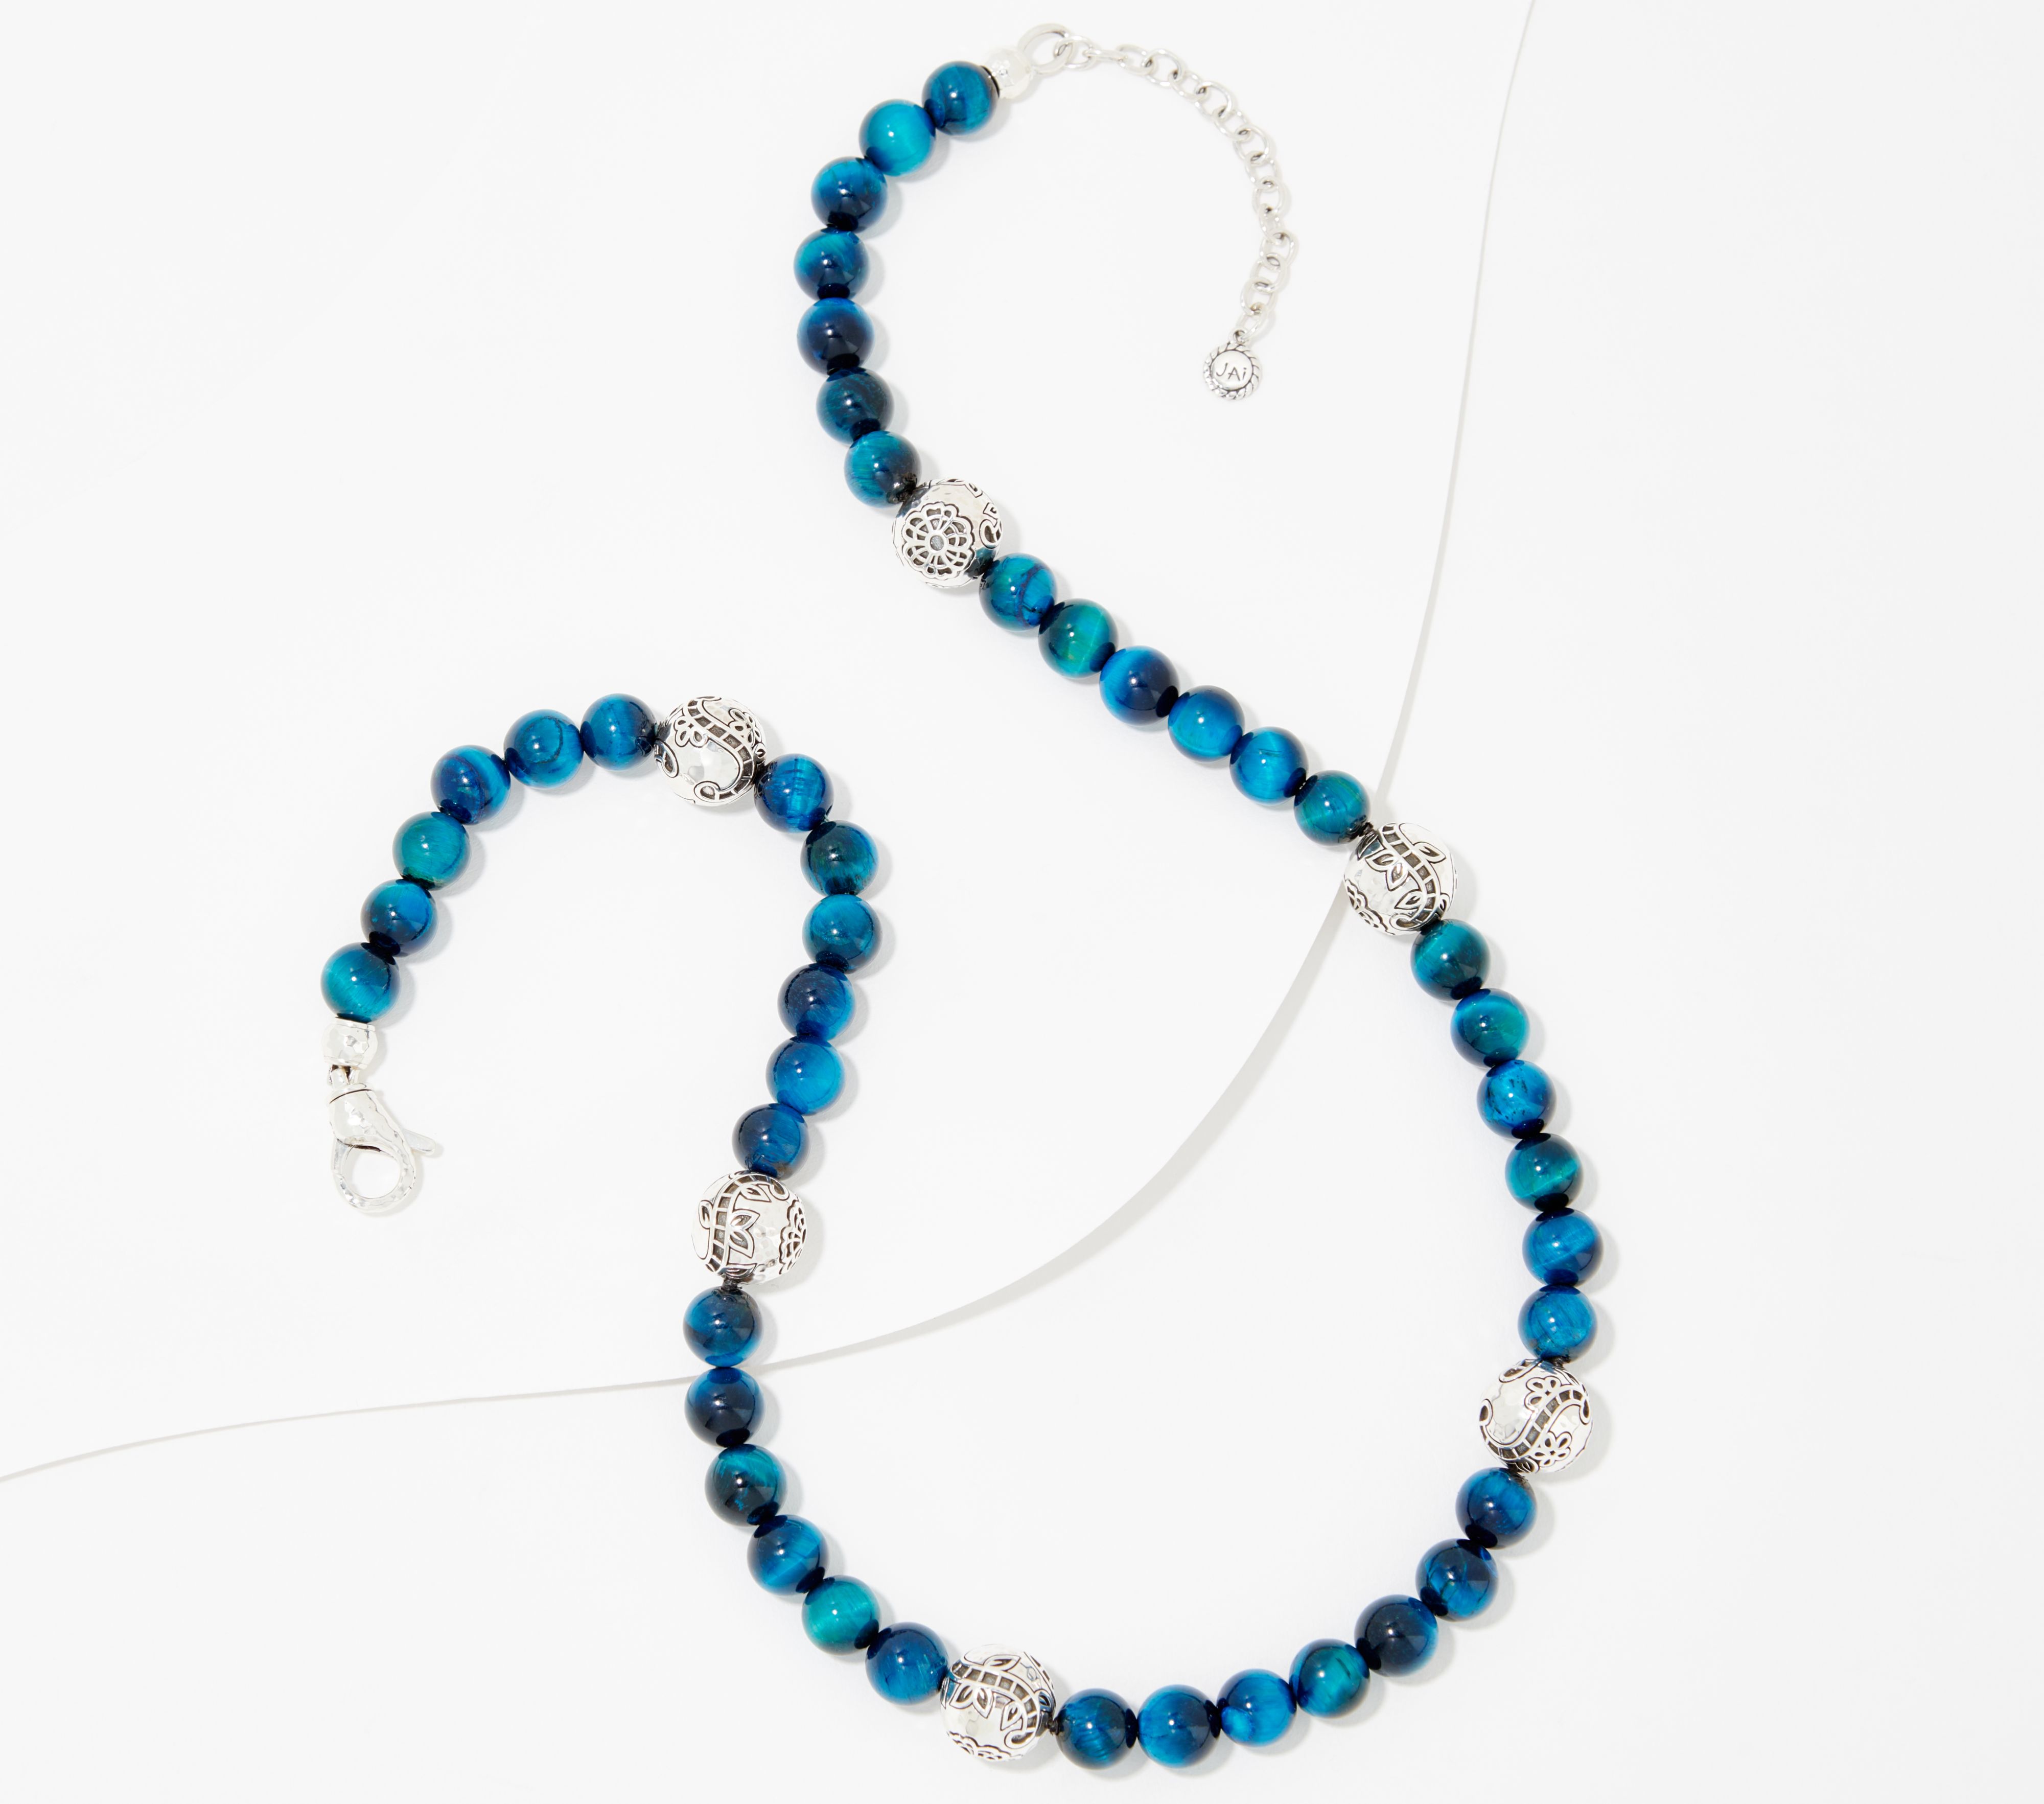 JAI Sterling Silver Lace & Tiger's Eye Gemstone Bead Necklace - QVC.com